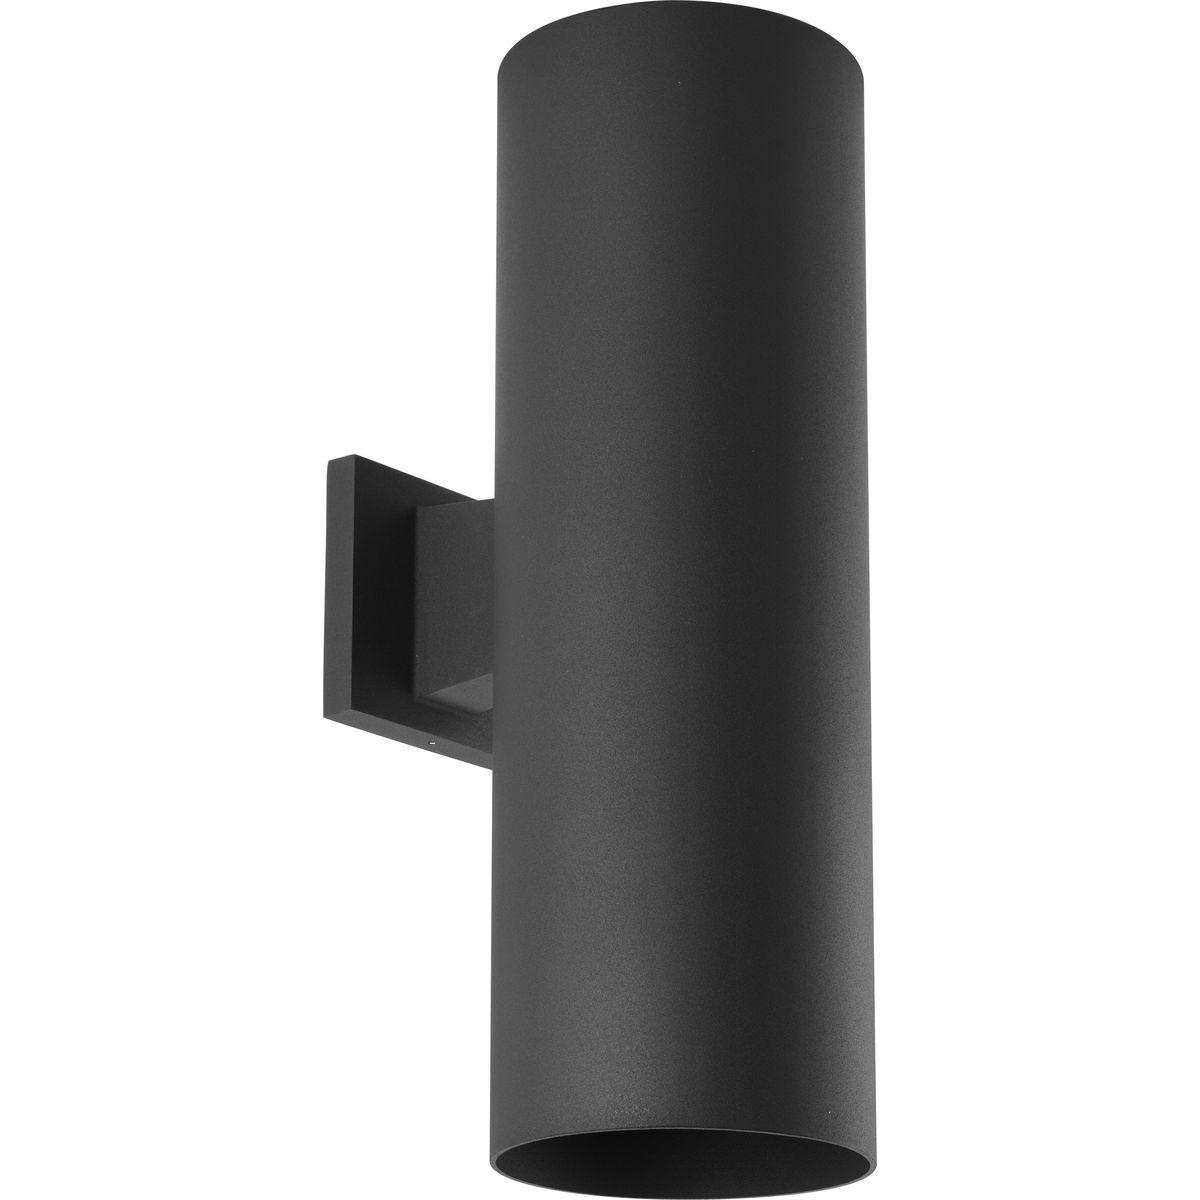 Hubbell P5642-31/30K 6" uplight/downlight wall cylinders are ideal for a wide variety of interior and exterior applications including residential and commercial. The aluminum Cylinders offers a contemporary design with its sleek cylindrical form and elegant fade and chip resi